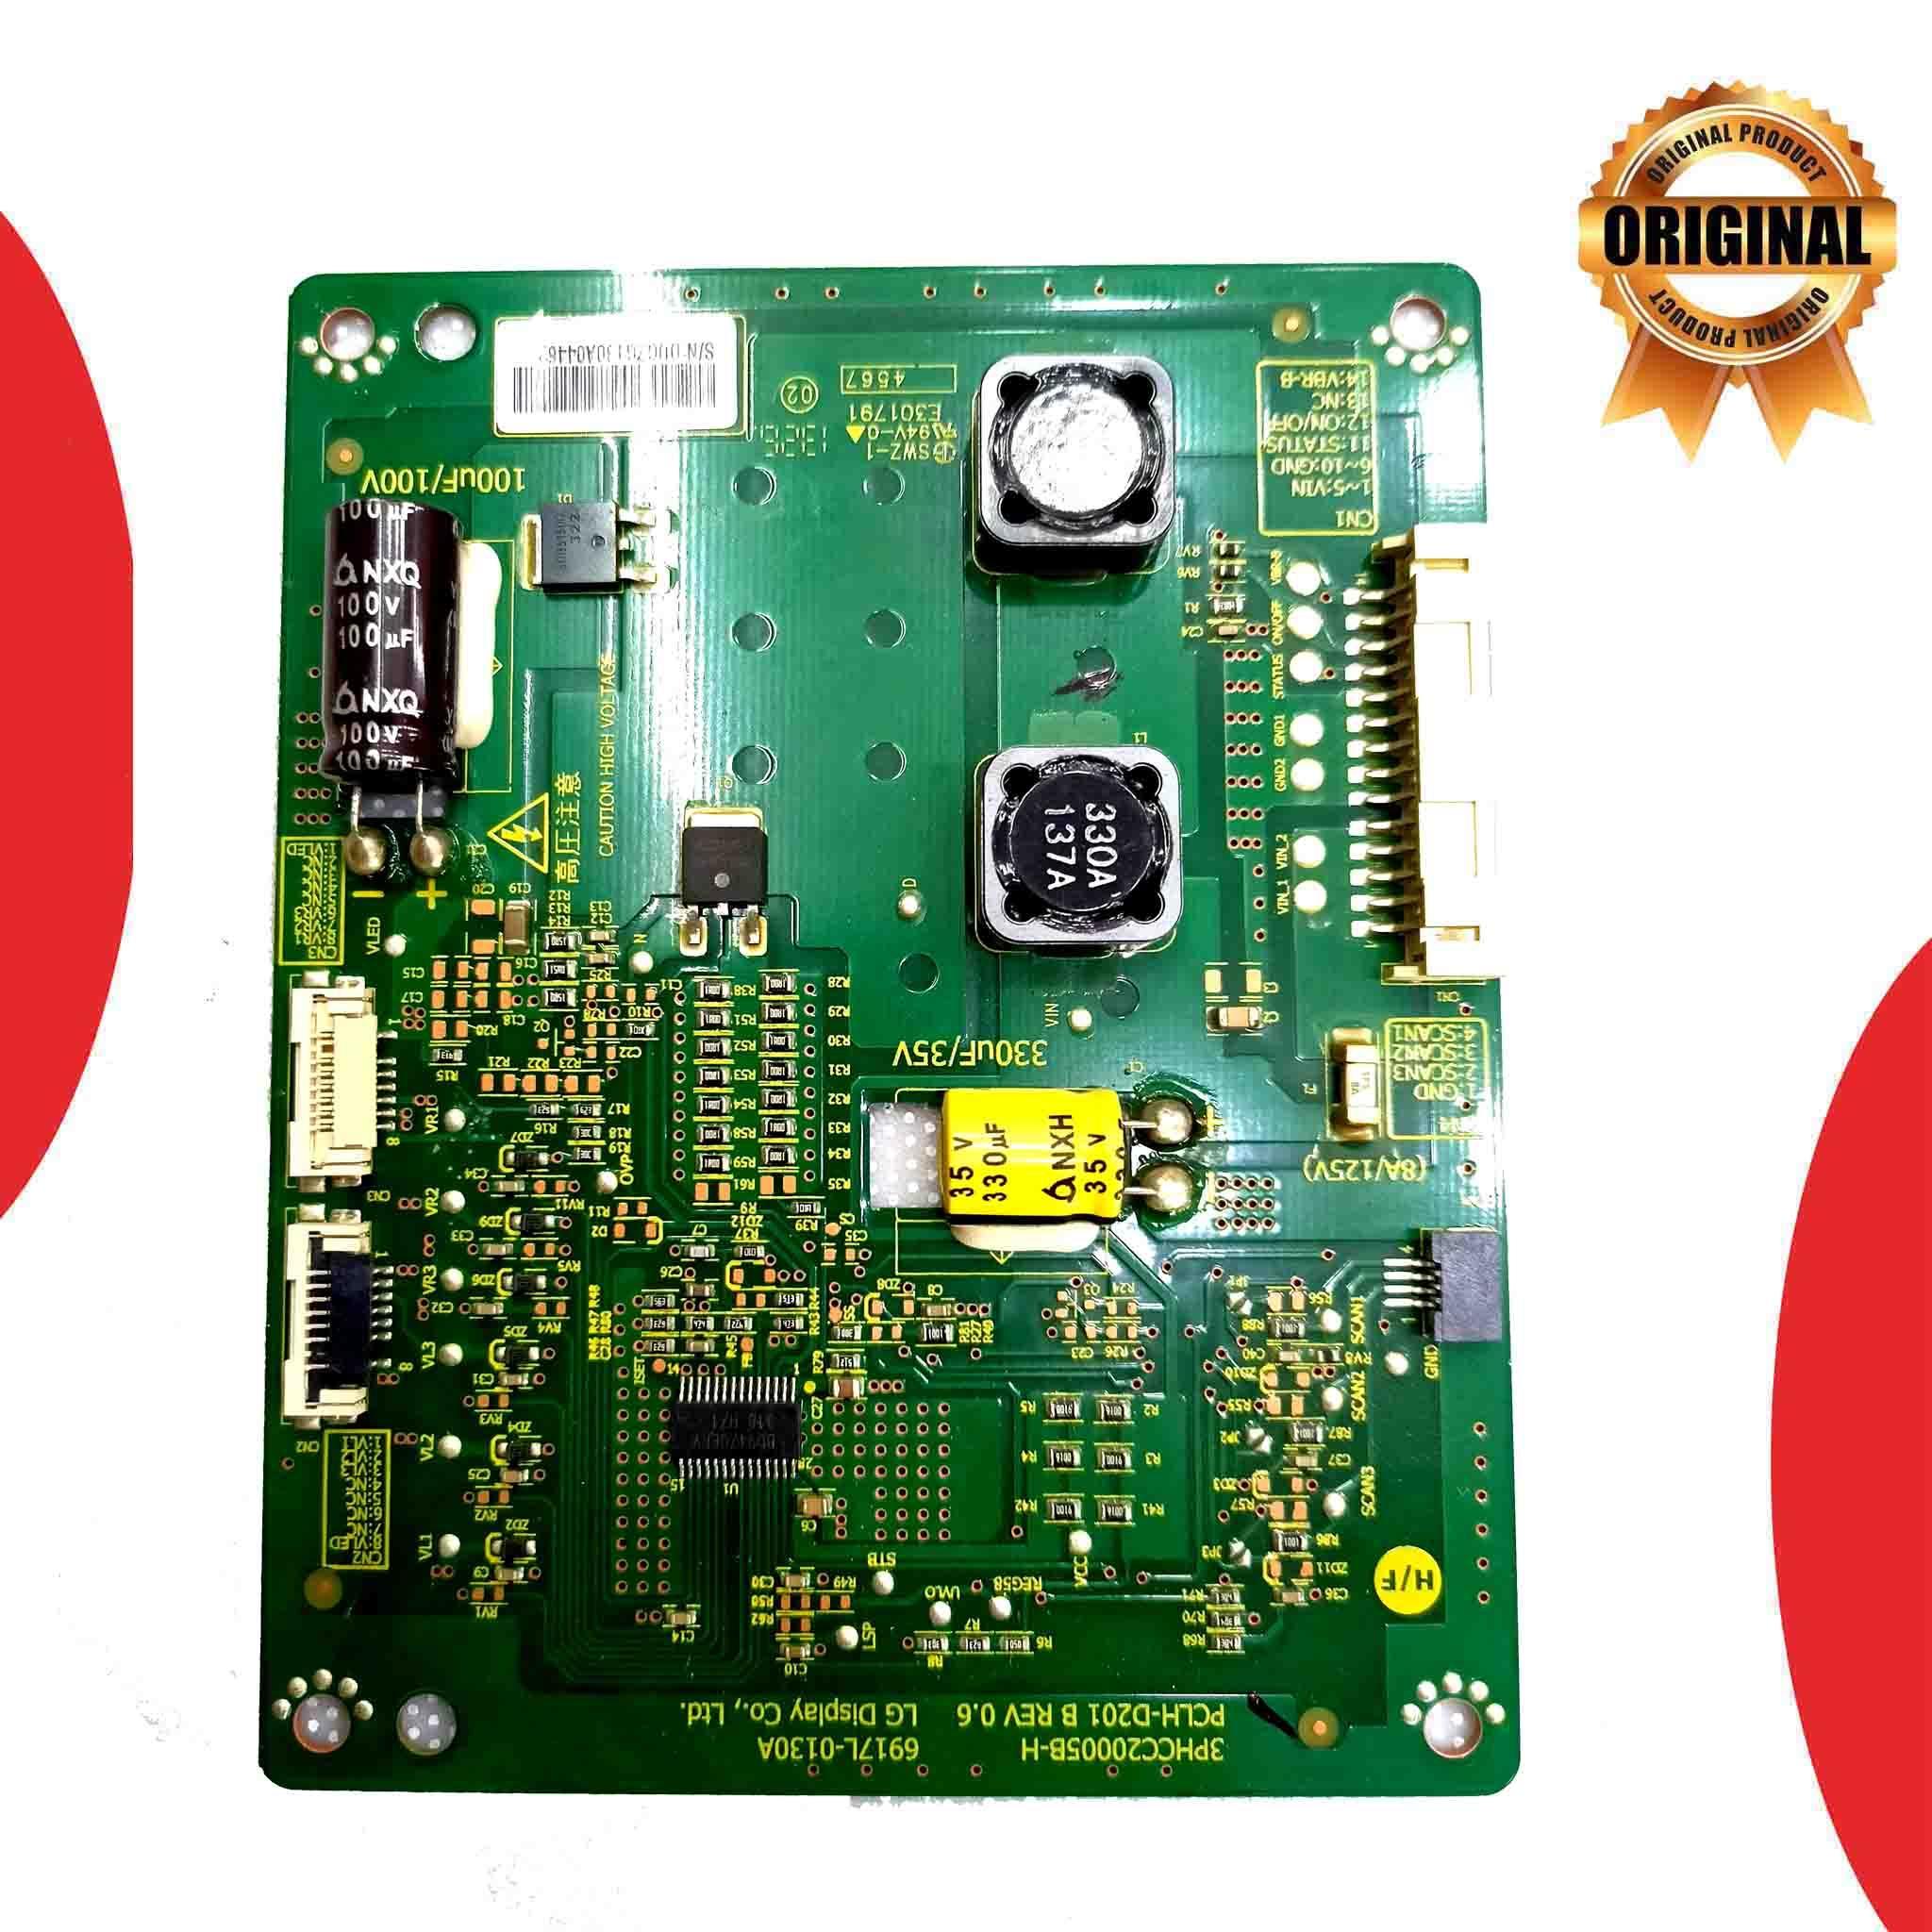 Reconnect 47 inch LED TV PCB for Model RELEE4701 - Great Bharat Electronics